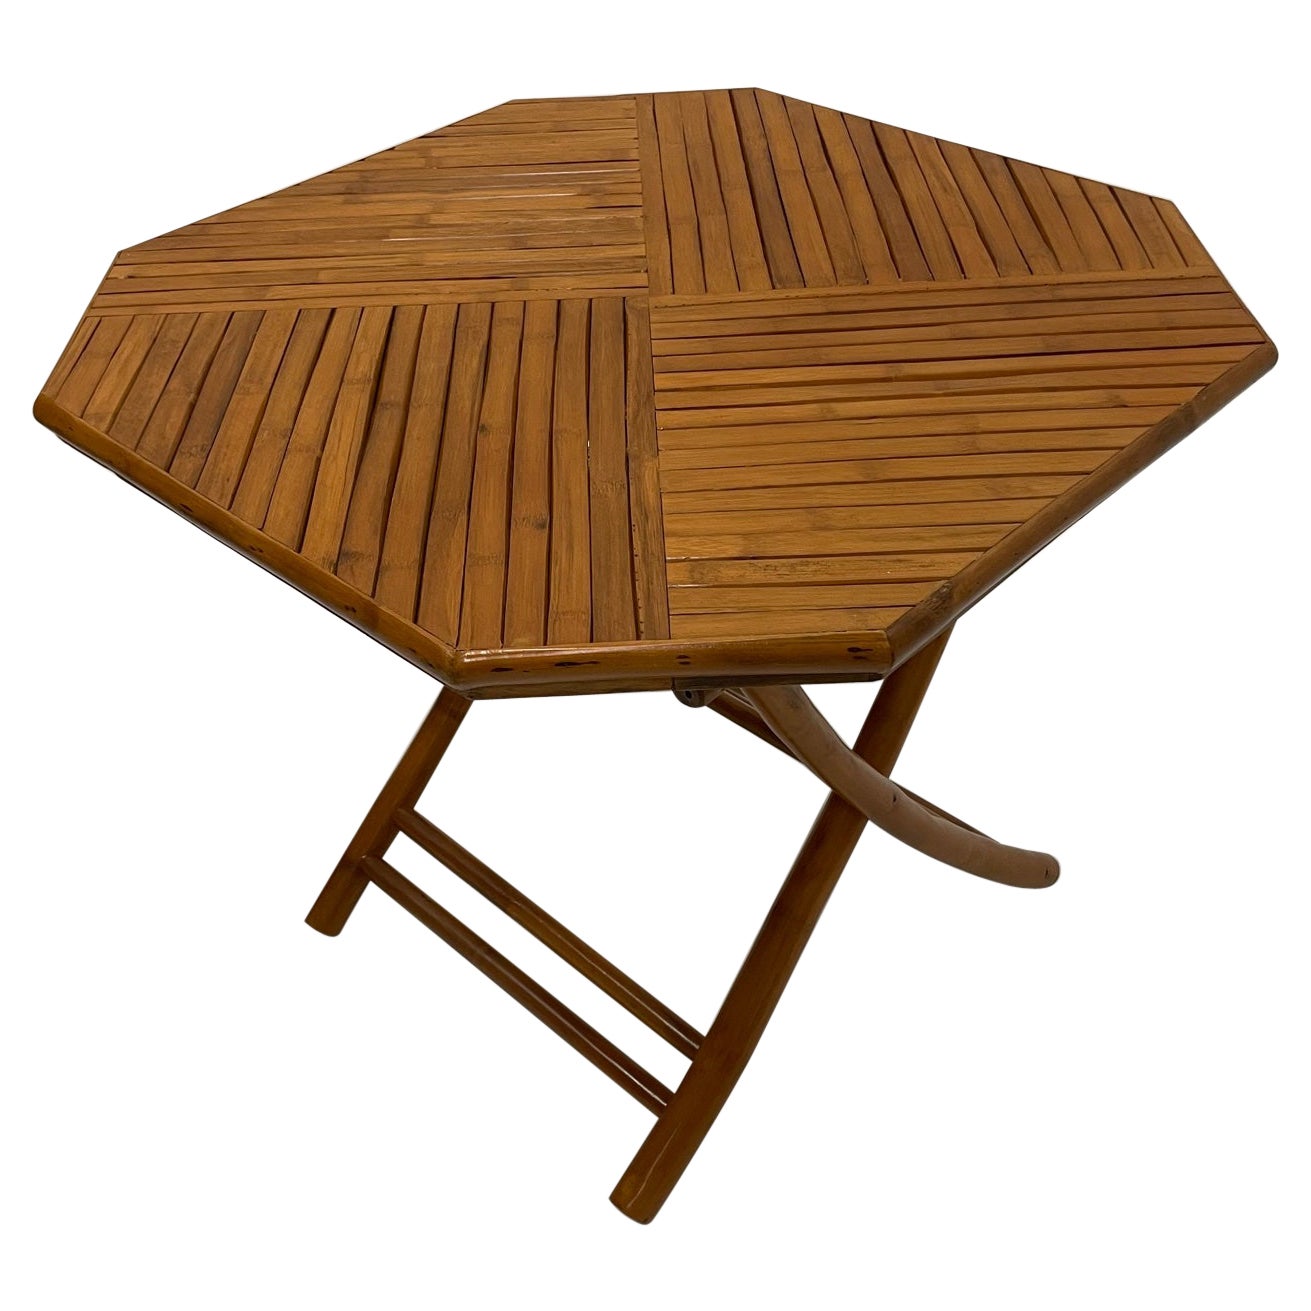 Stylish 8 Sided Folding Bamboo Breakfast or Center Table